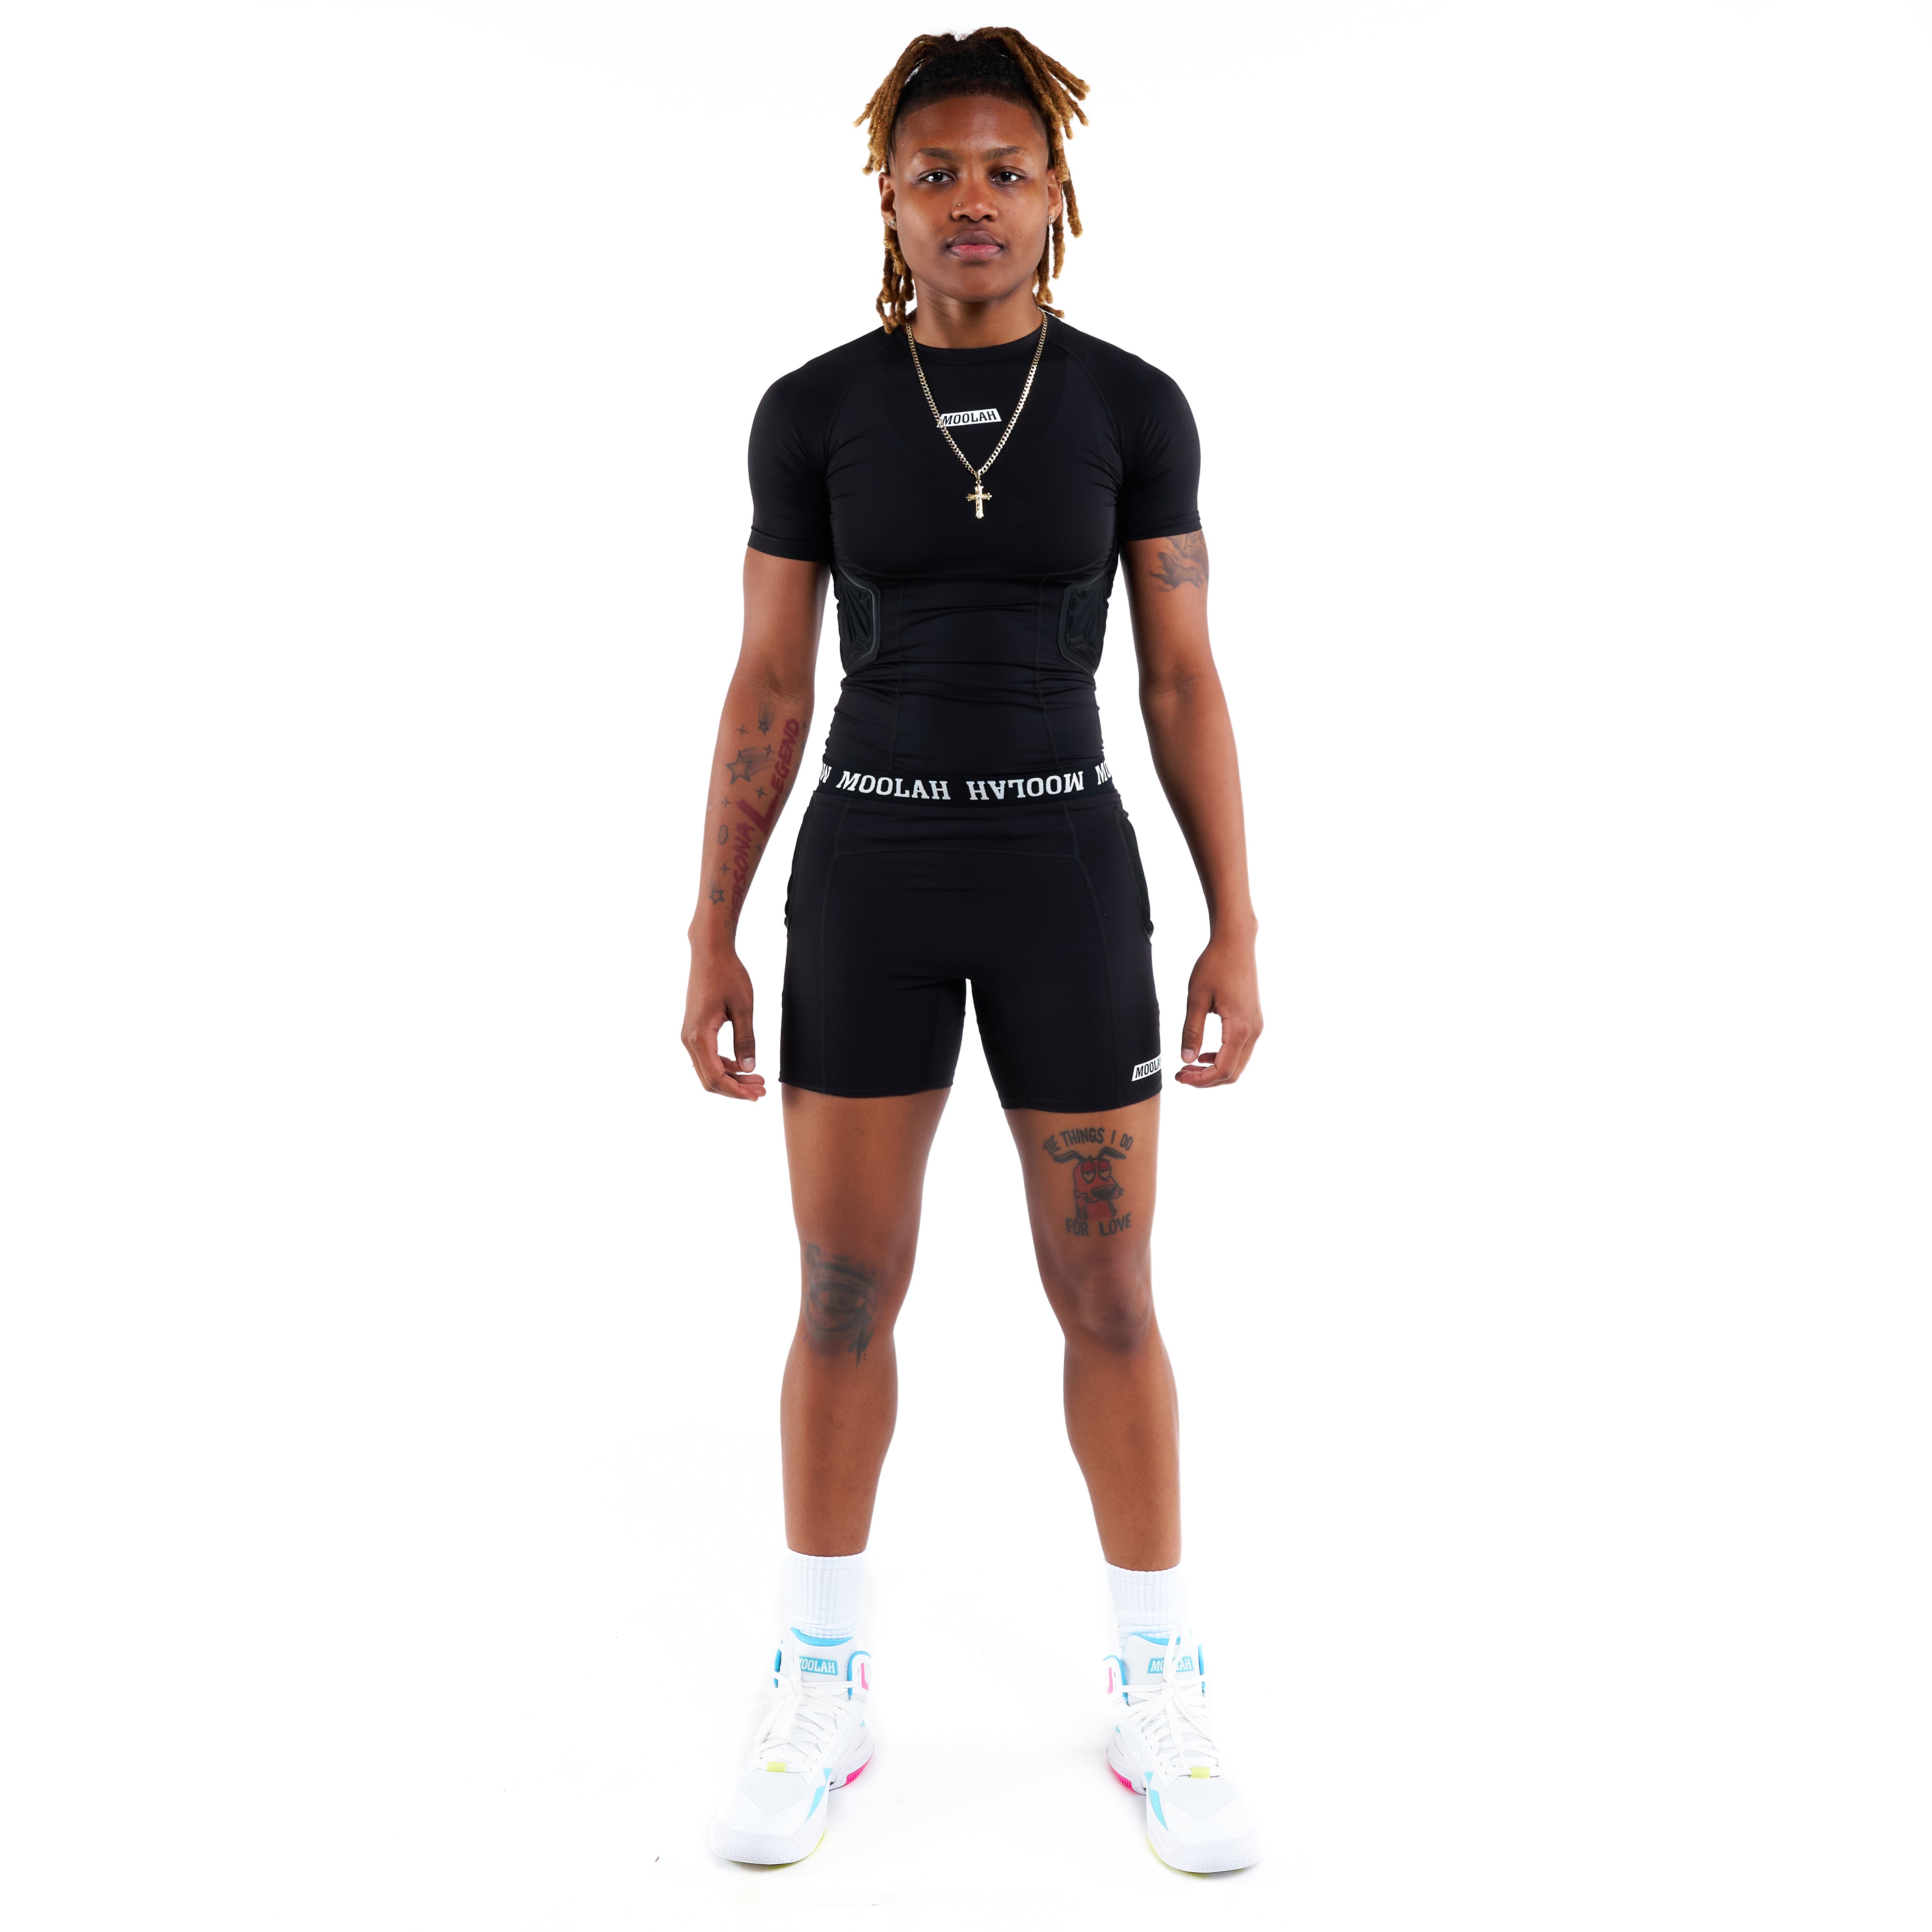 PADDED COMPRESSION TOP - BLACKTOP